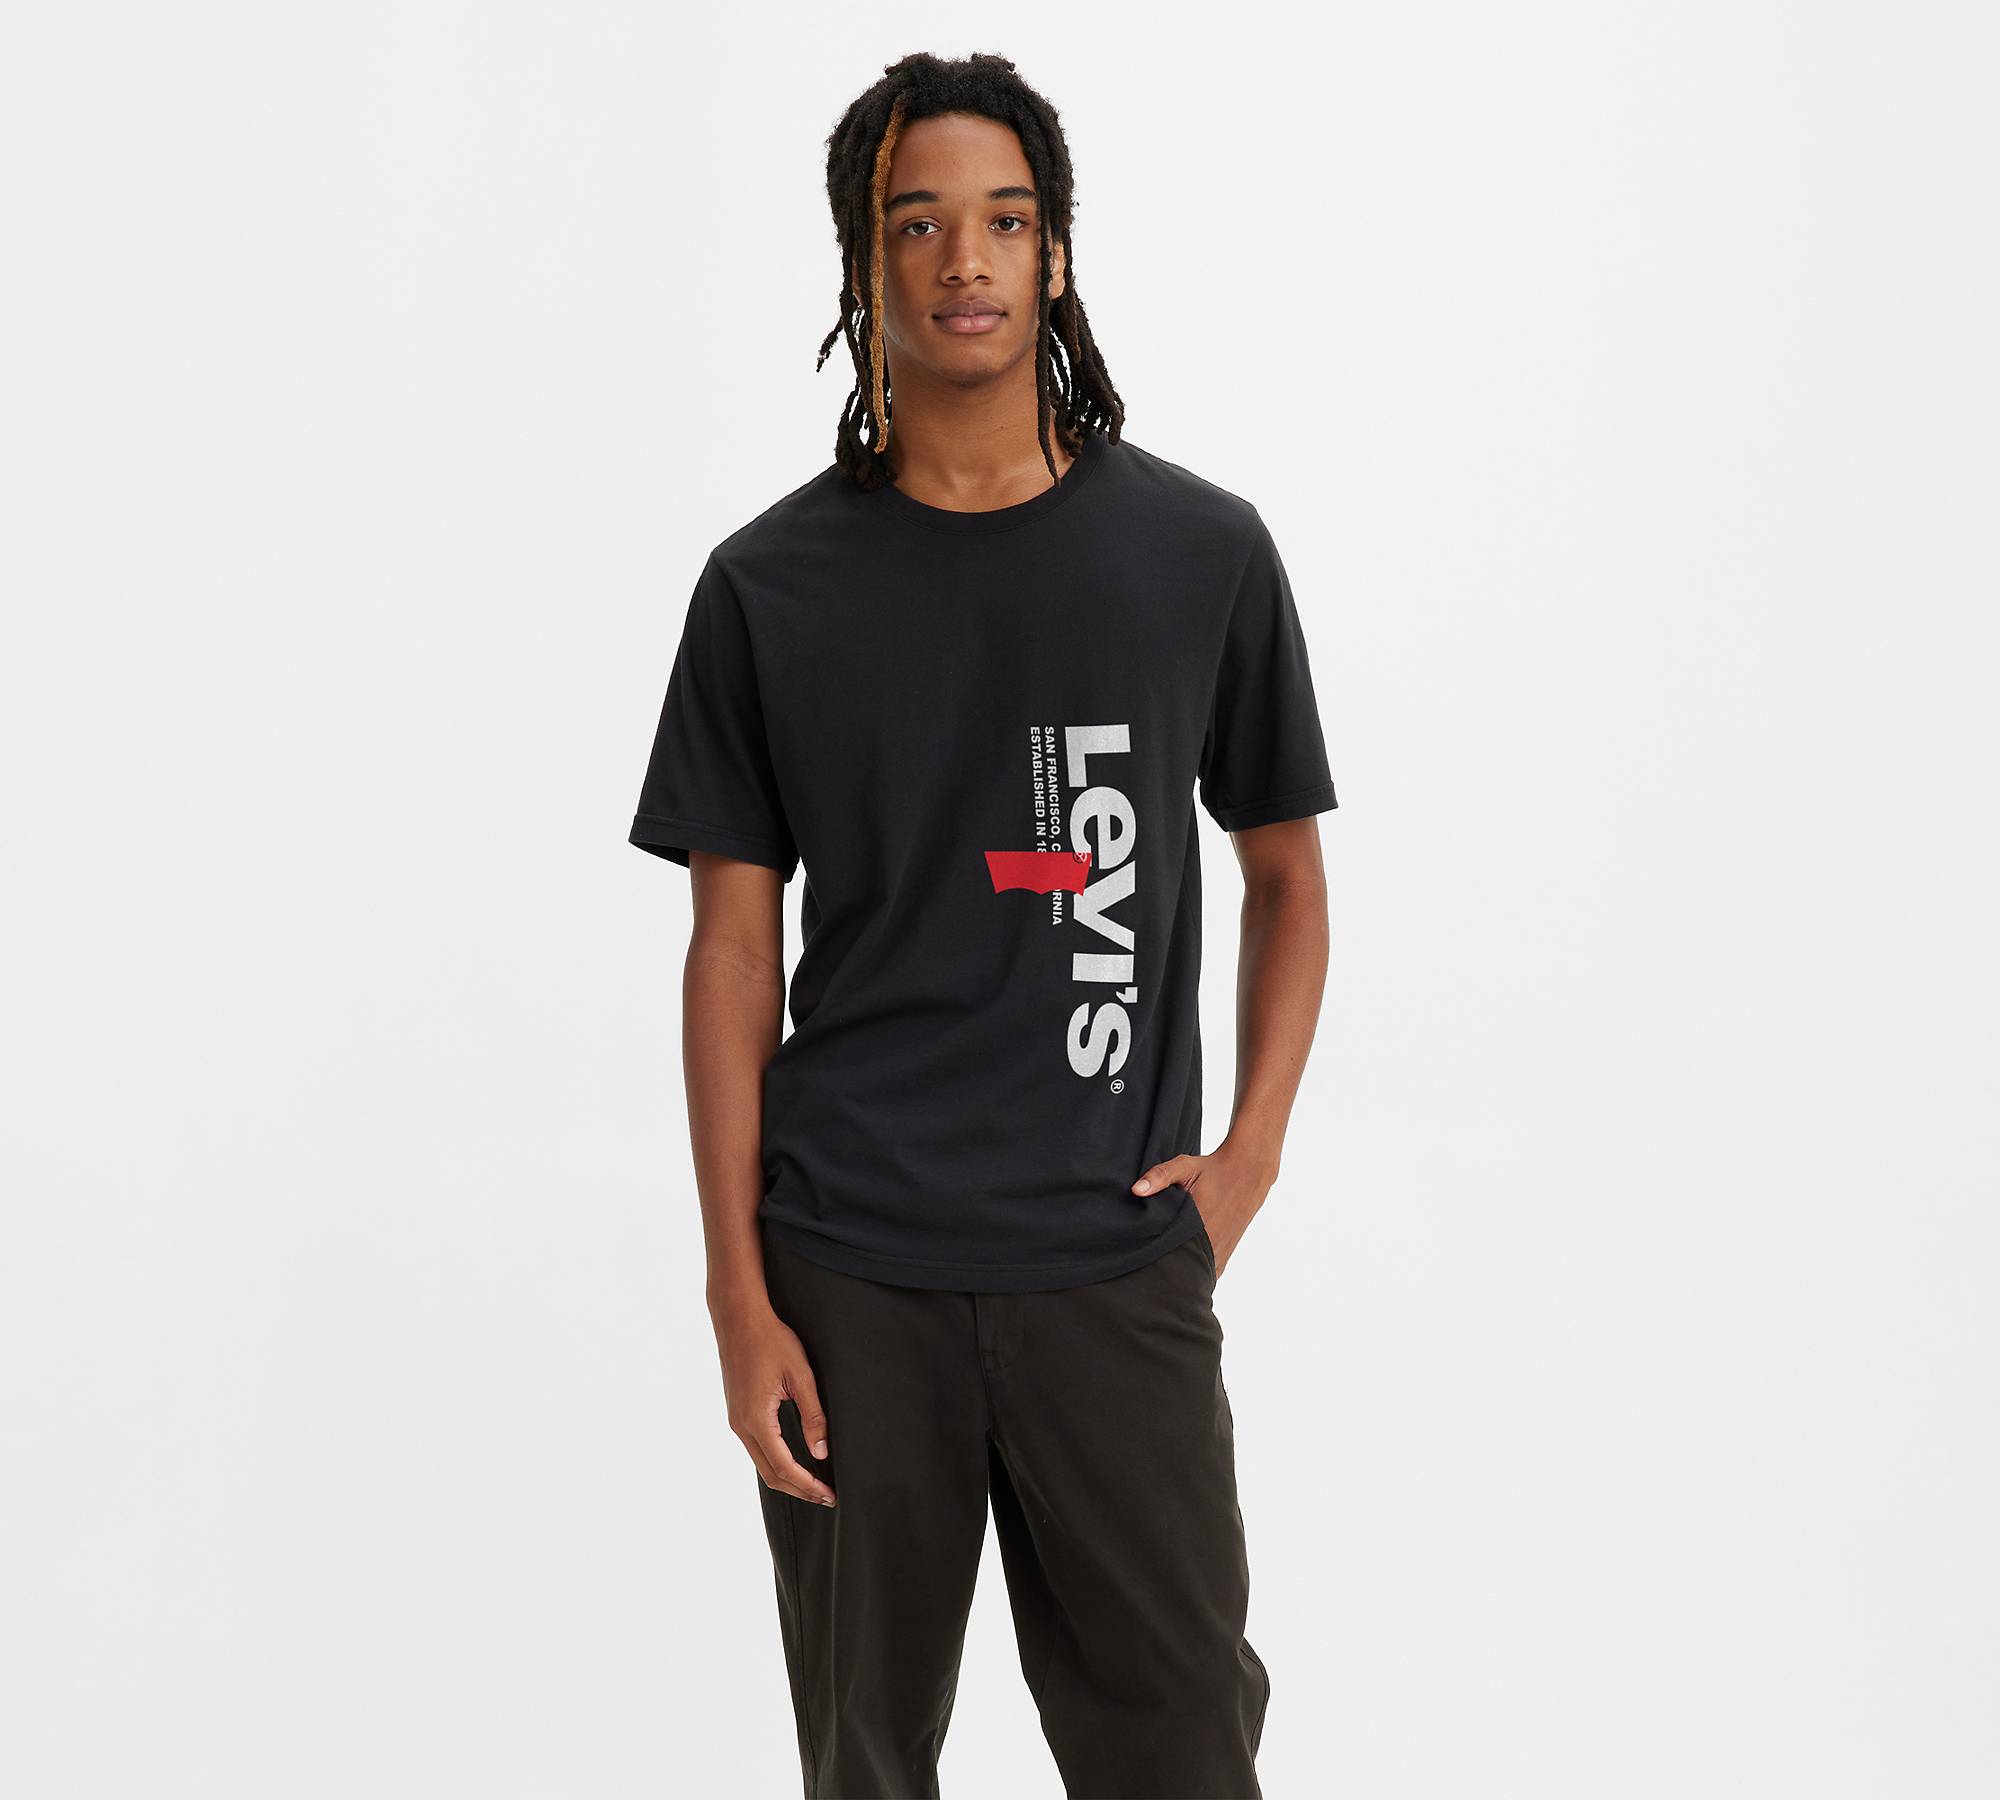 Relaxed Fit Short Sleeve T-shirt - Black | Levi's® US